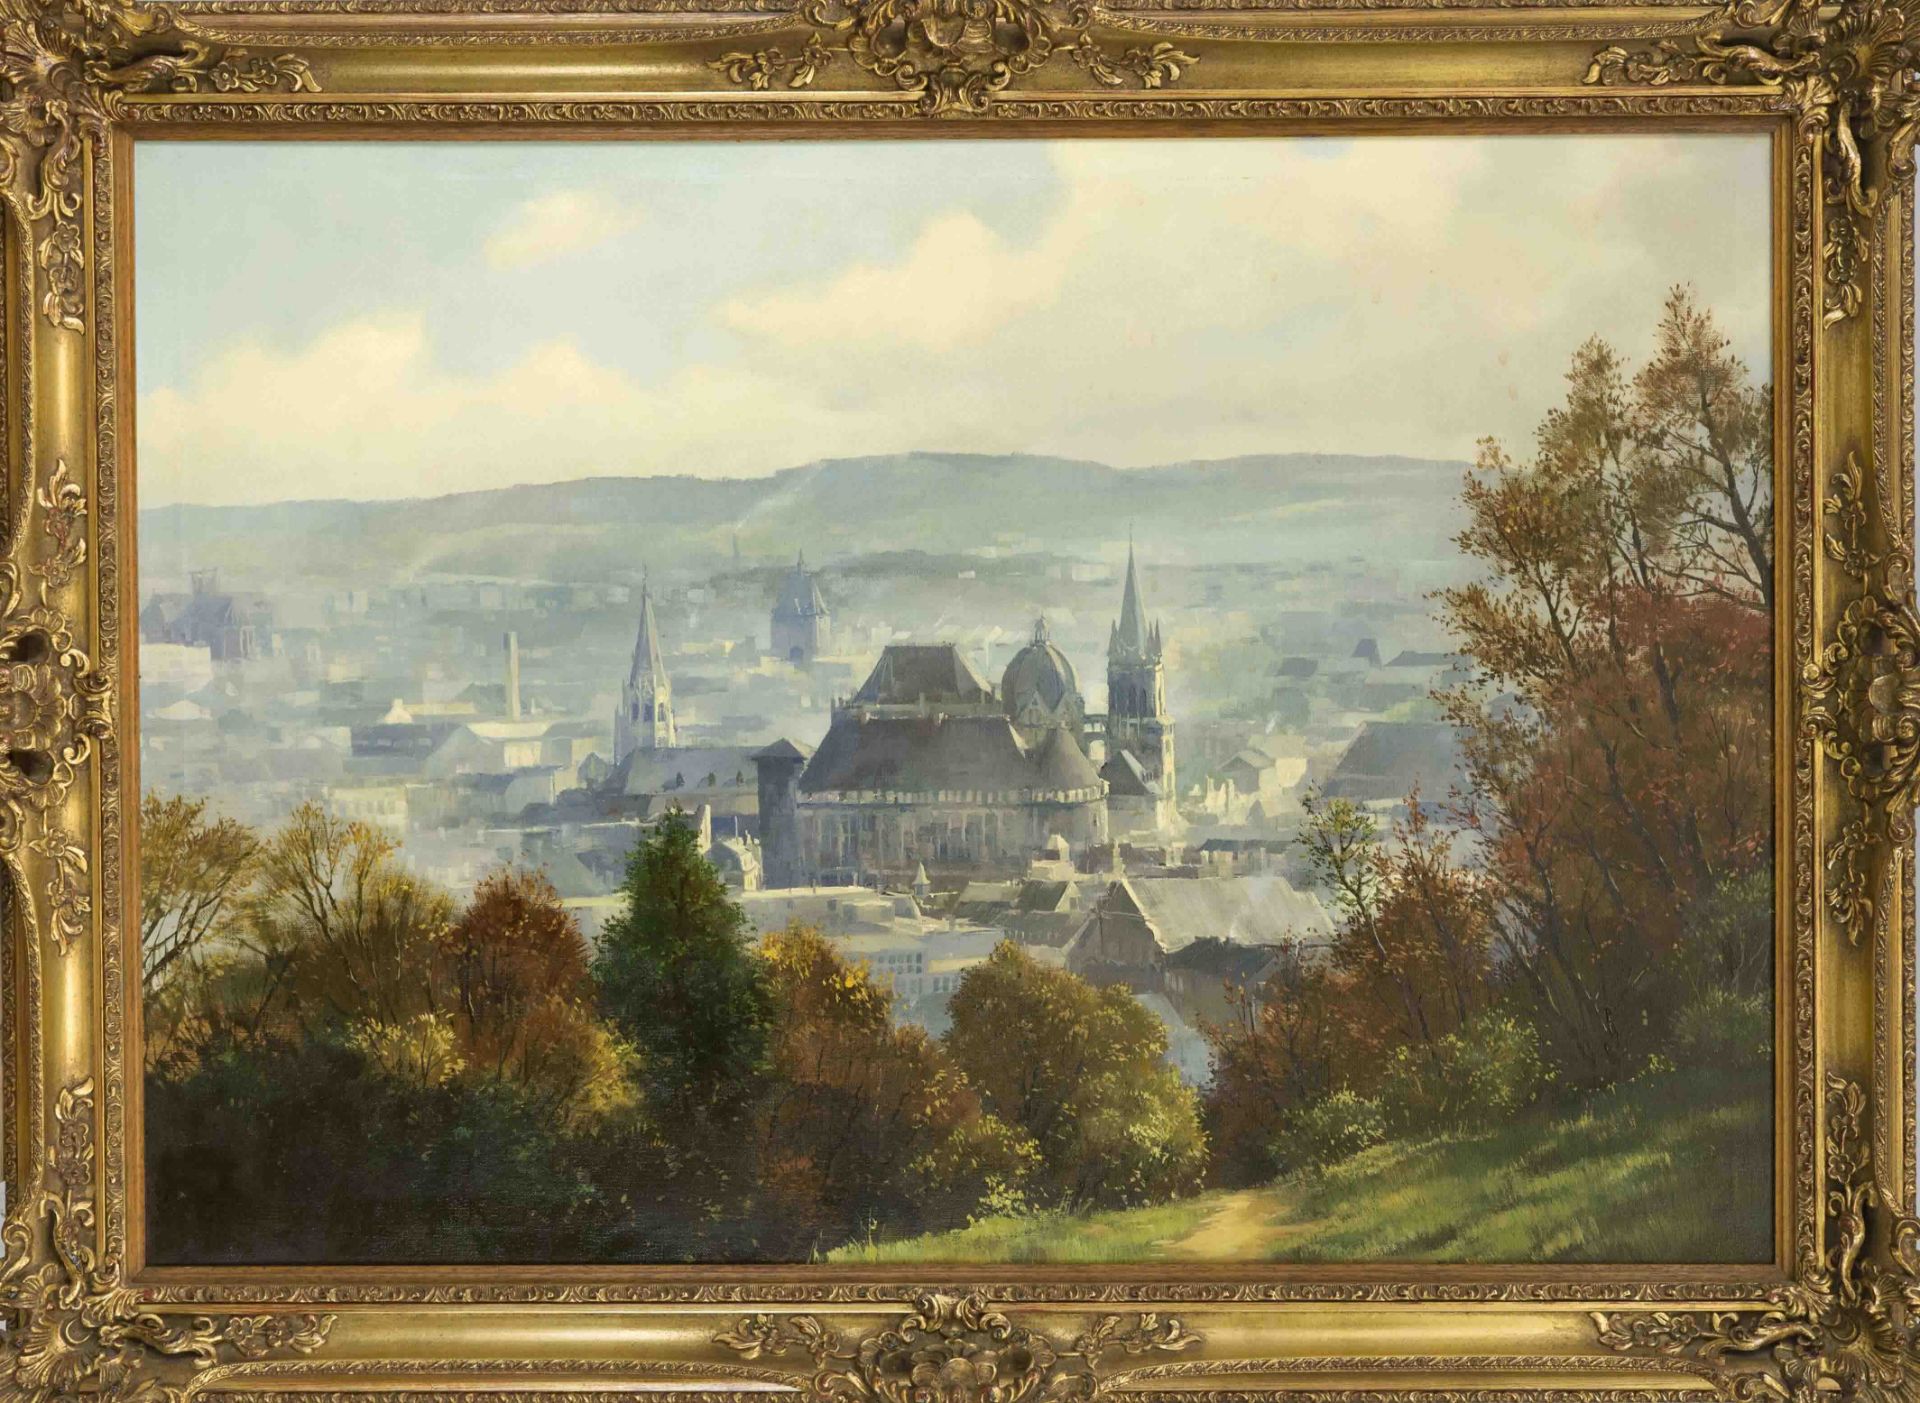 anonymous veduta painter 2nd half 20th century, Panorama of Aachen with the cathedral in the center,